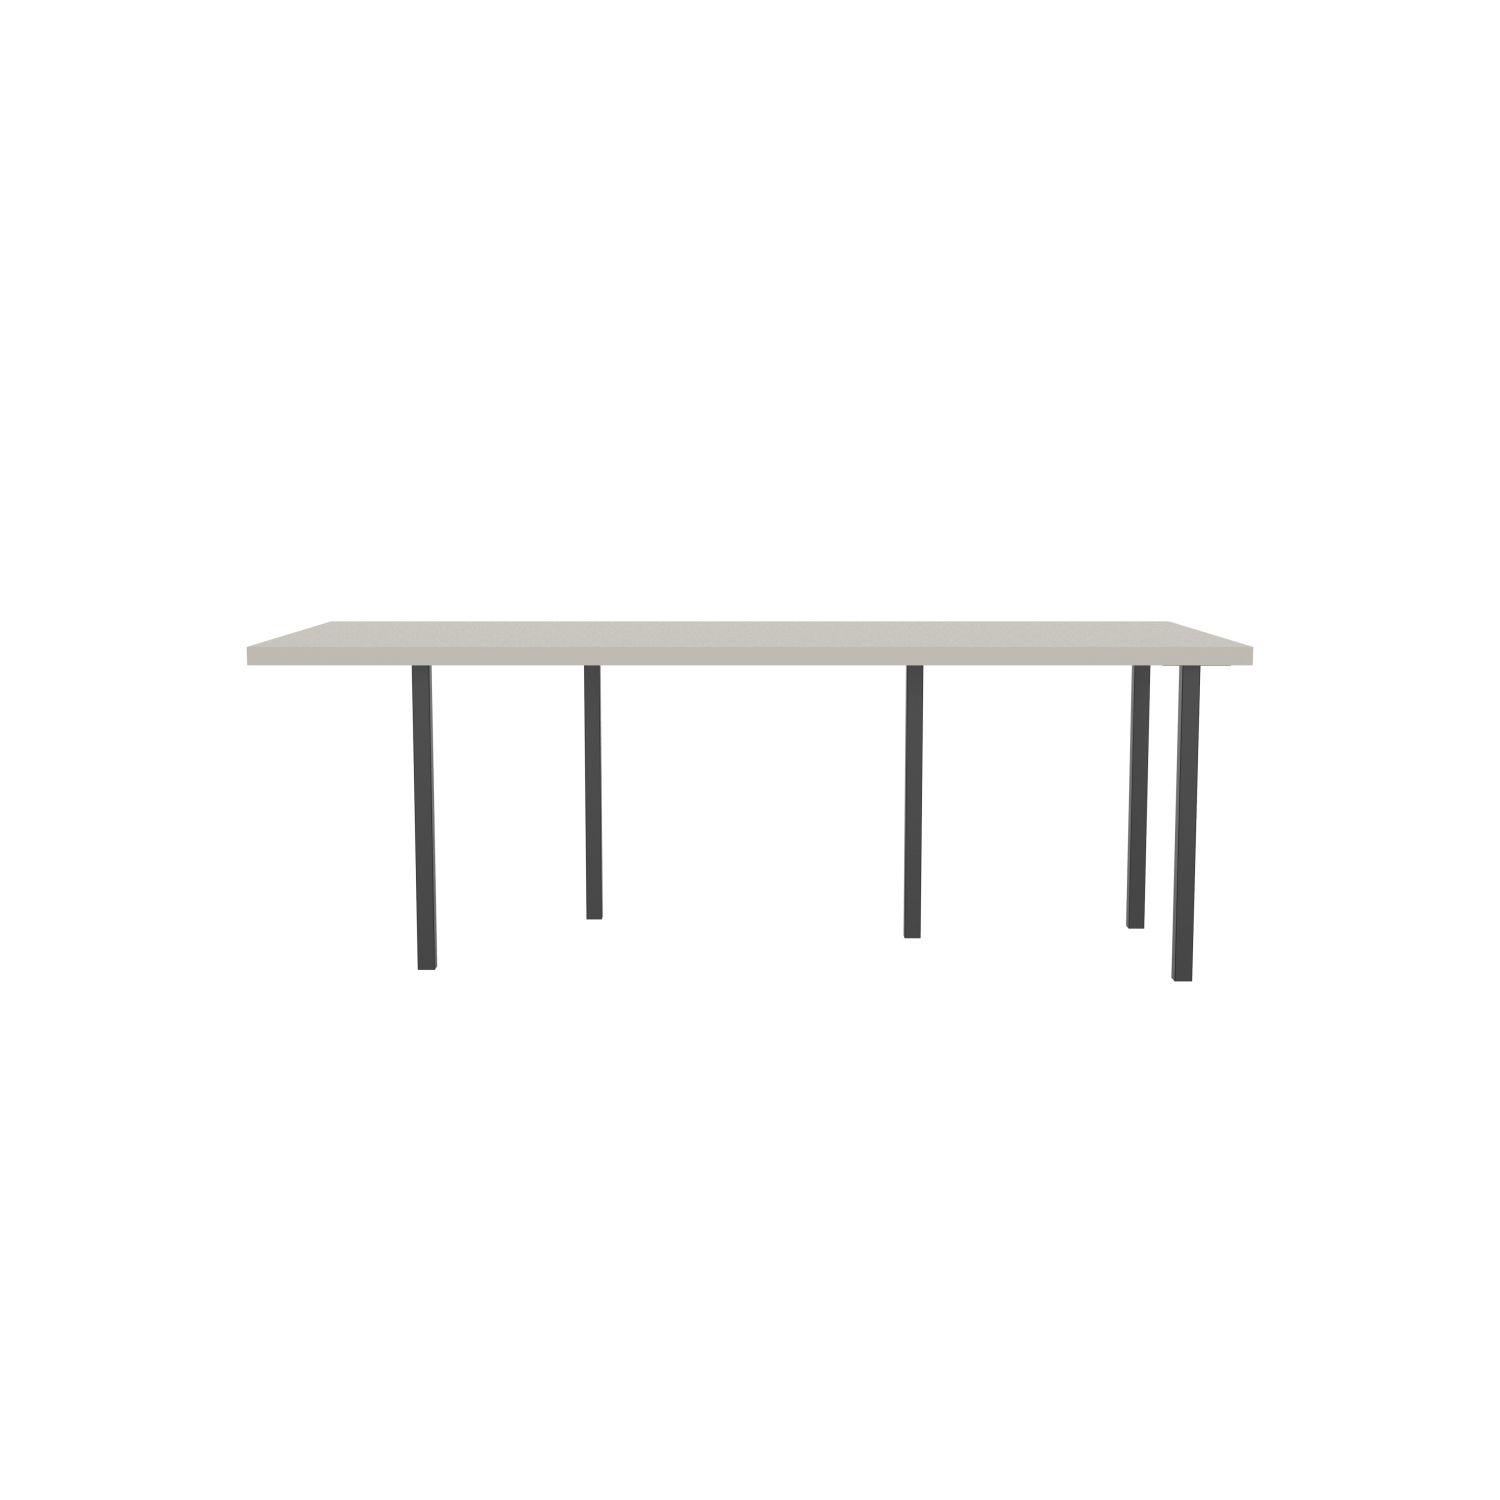 lensvelt bbrand table five fixed heigt 915x218 hpl white 50 mm price level 1 black ral9005